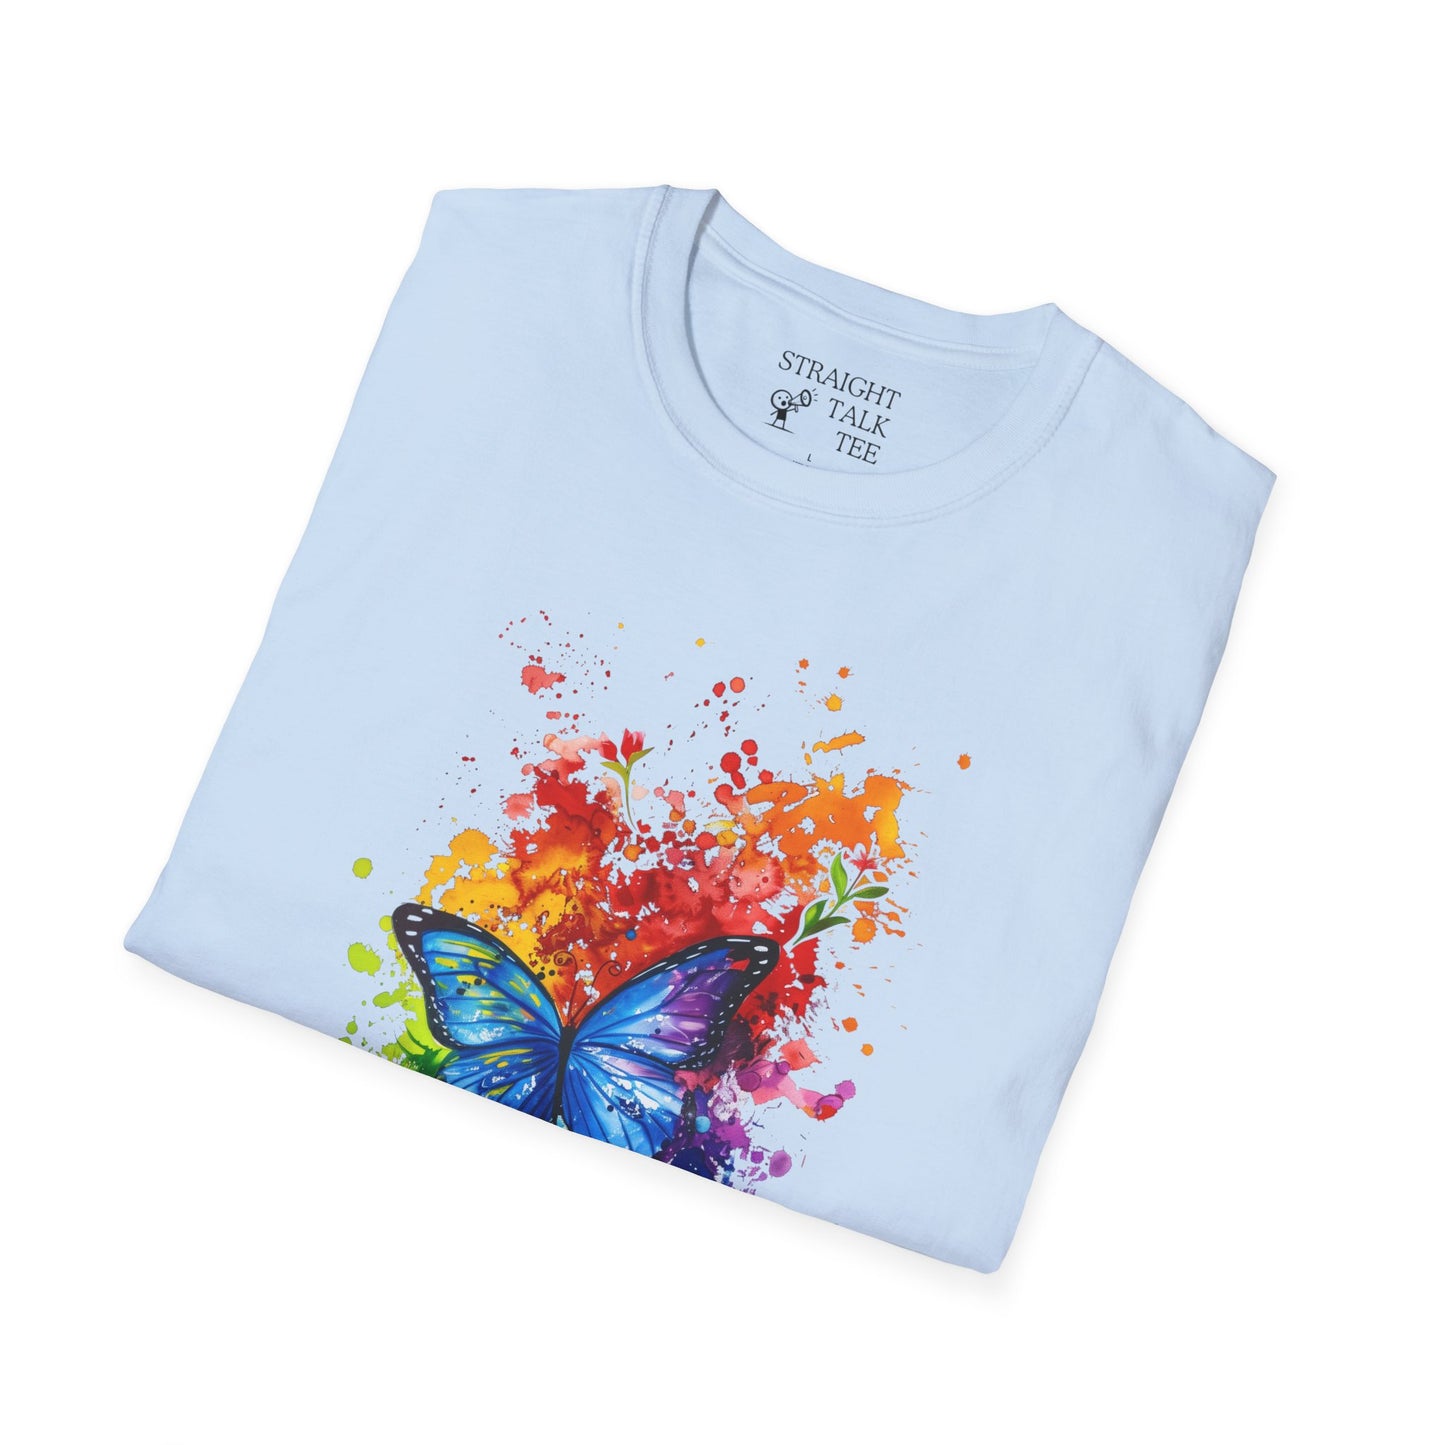 Pride Butterfly t-shirt | Show Your Pride!